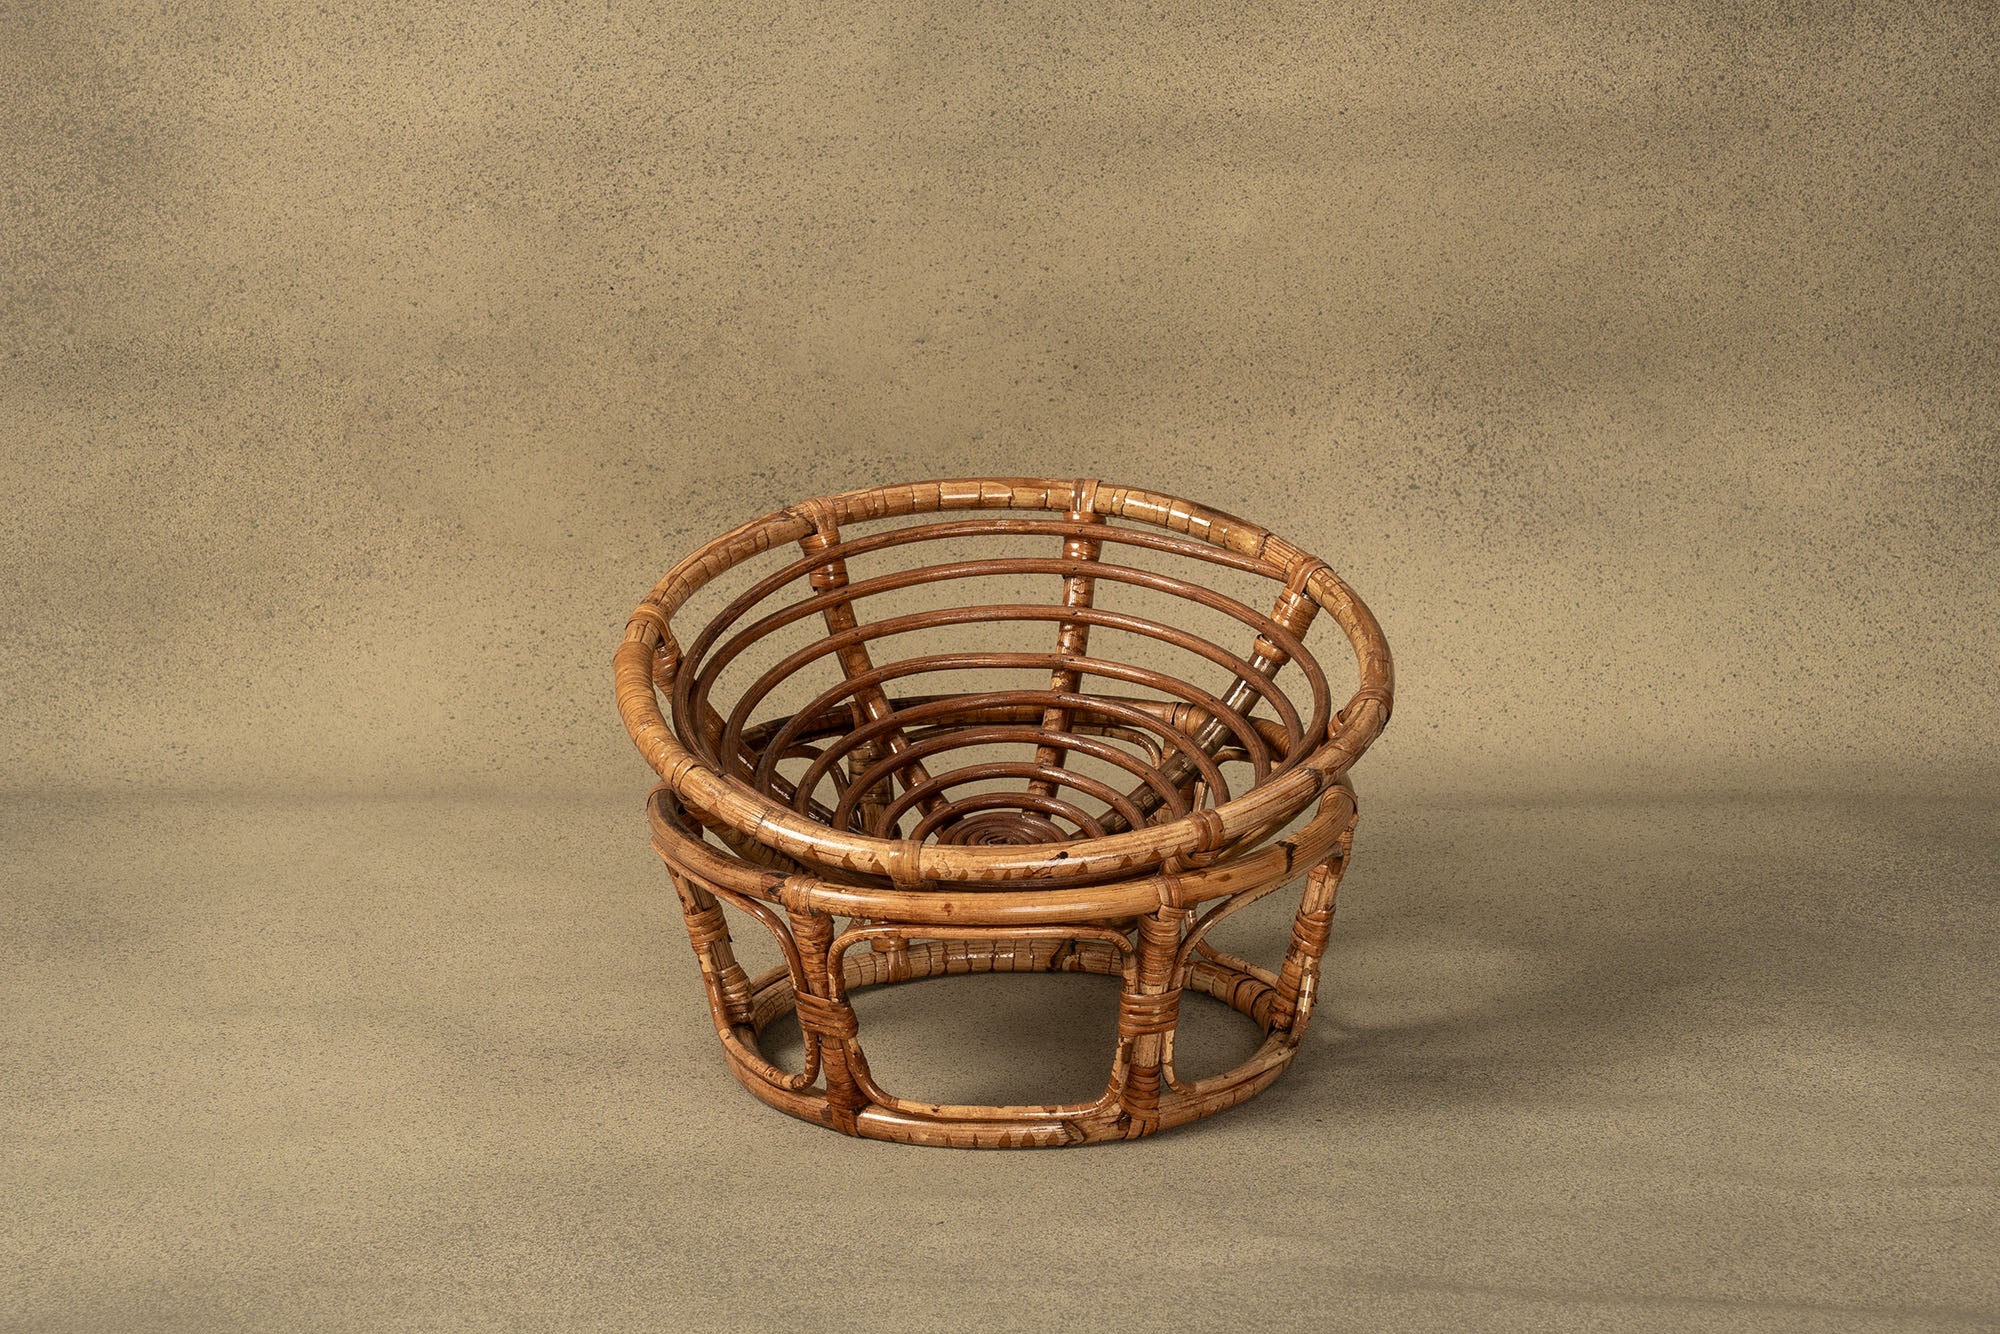 Kate Bamboo Woven Round Double Layer Basket Newborn Props